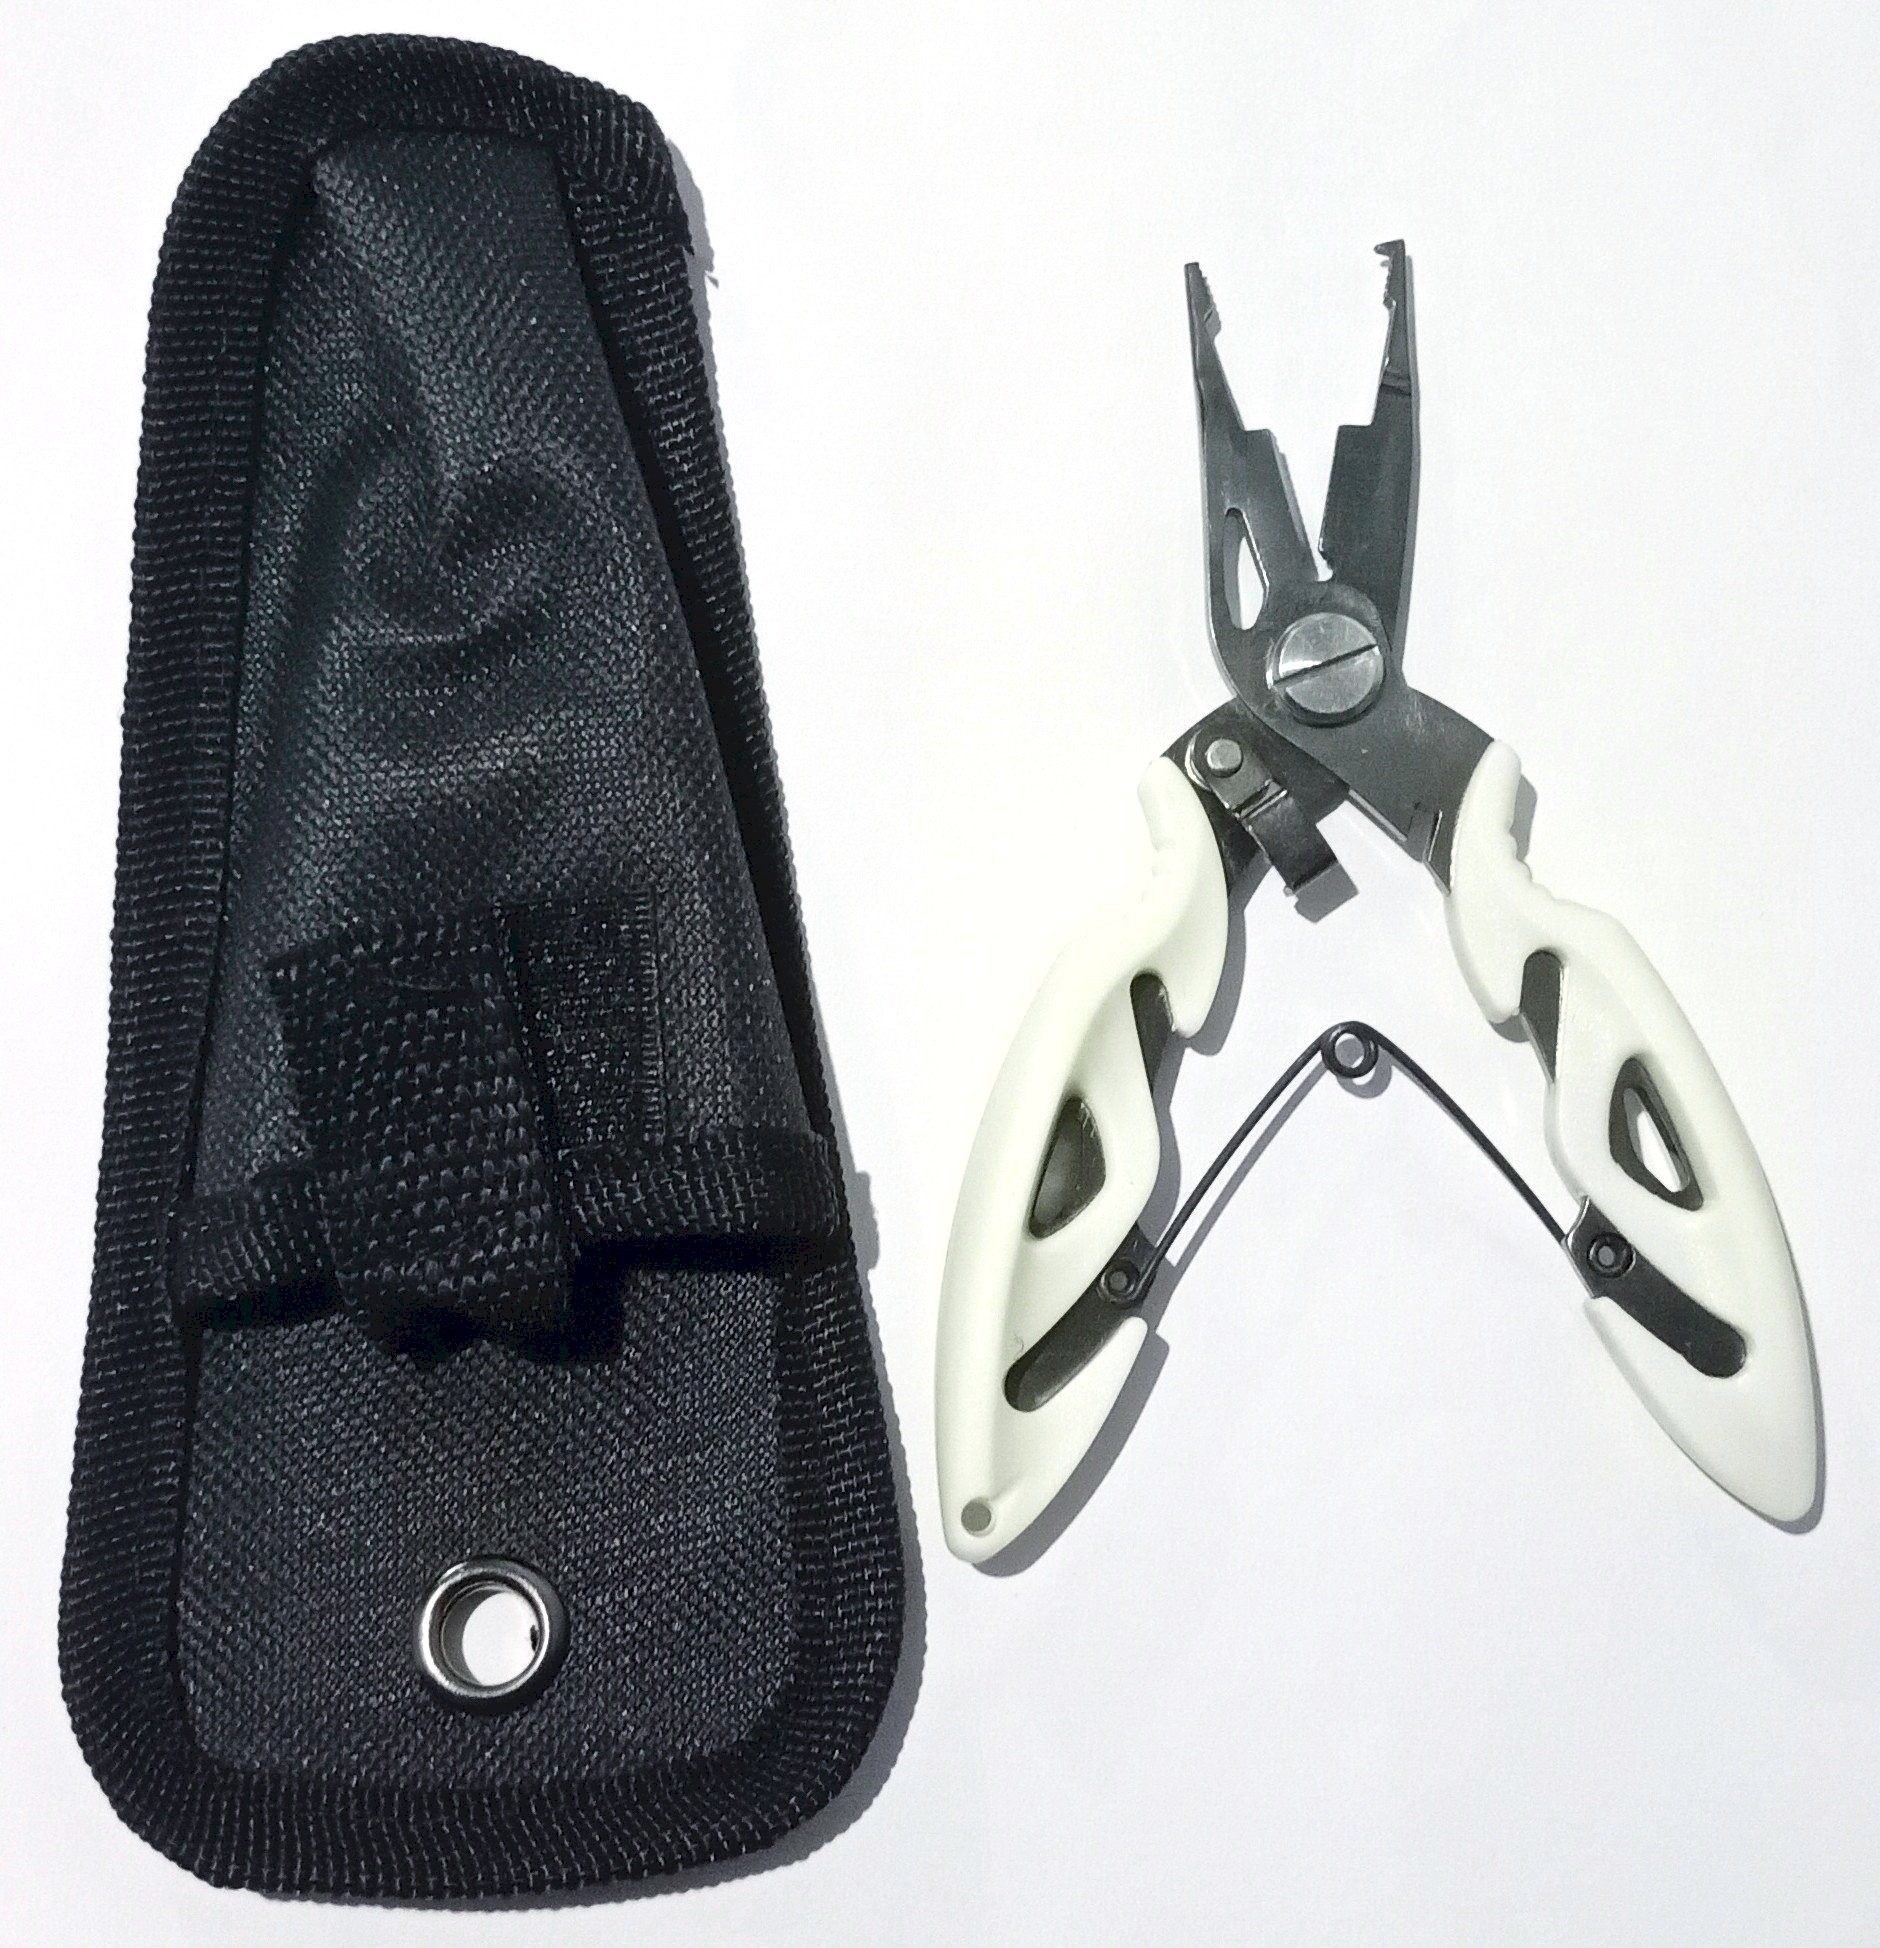 Micro Split ring and line cutter pliers - Mermentribe- Online Tackles Store